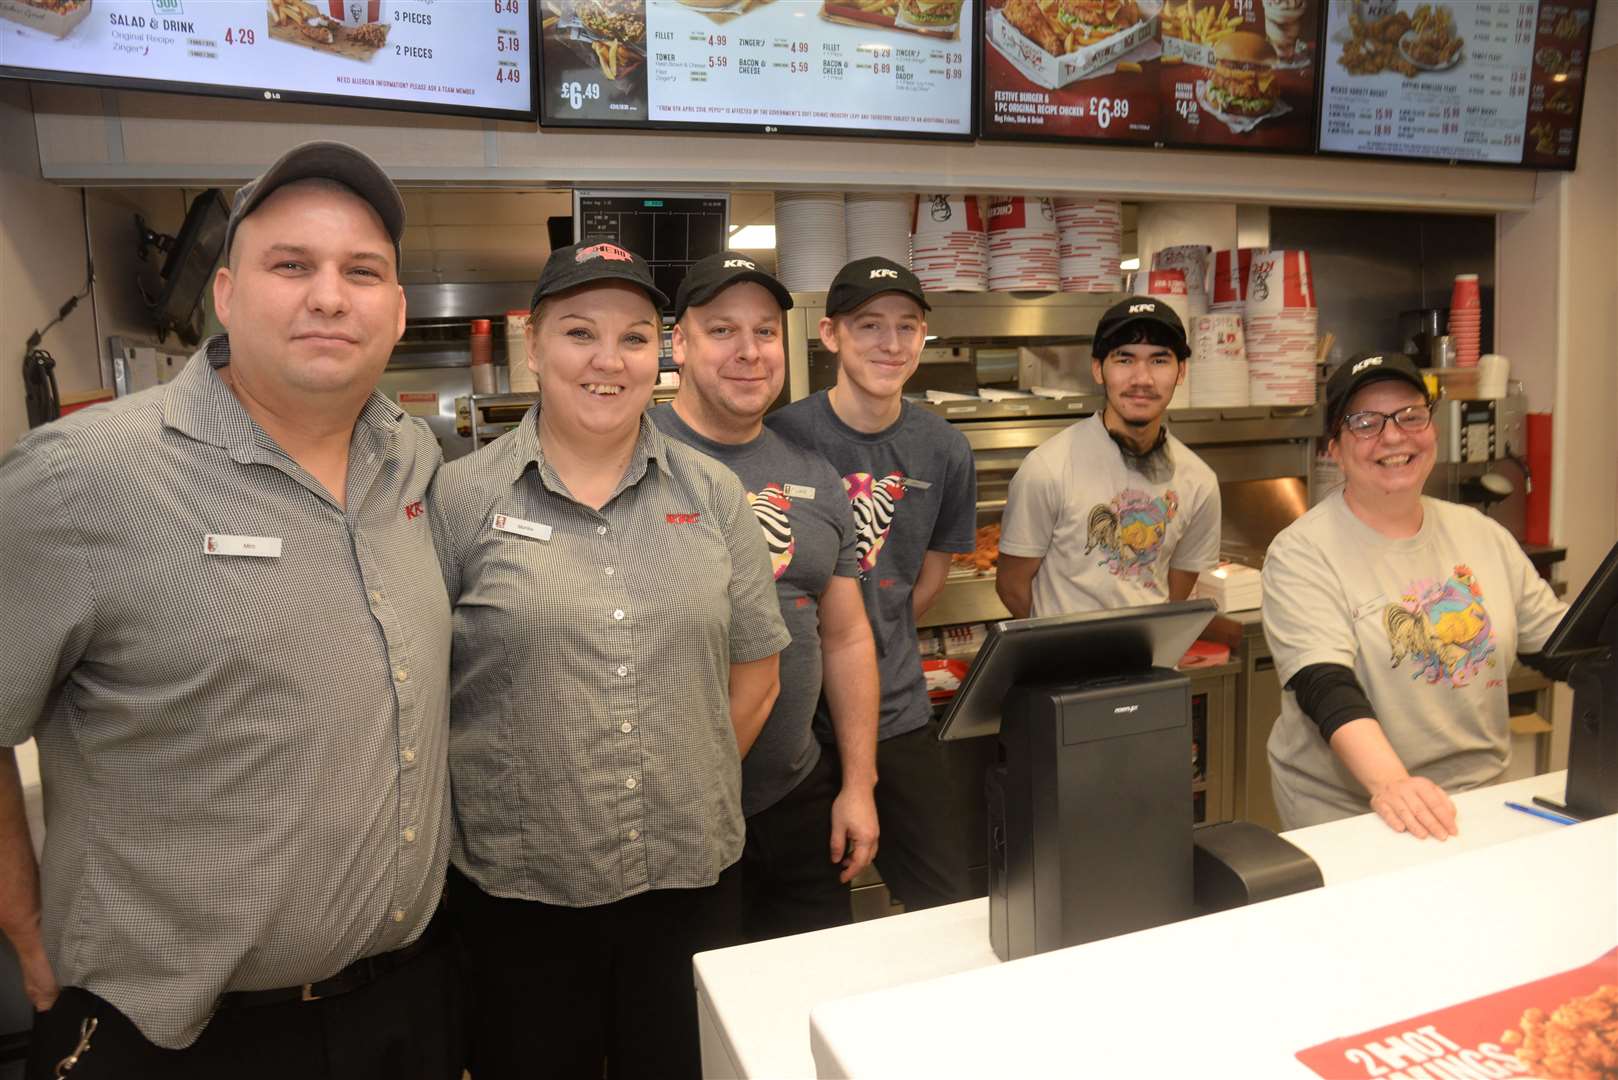 Miro Steficke and some of his team at the KFC in Sutton Road, Maidstone.